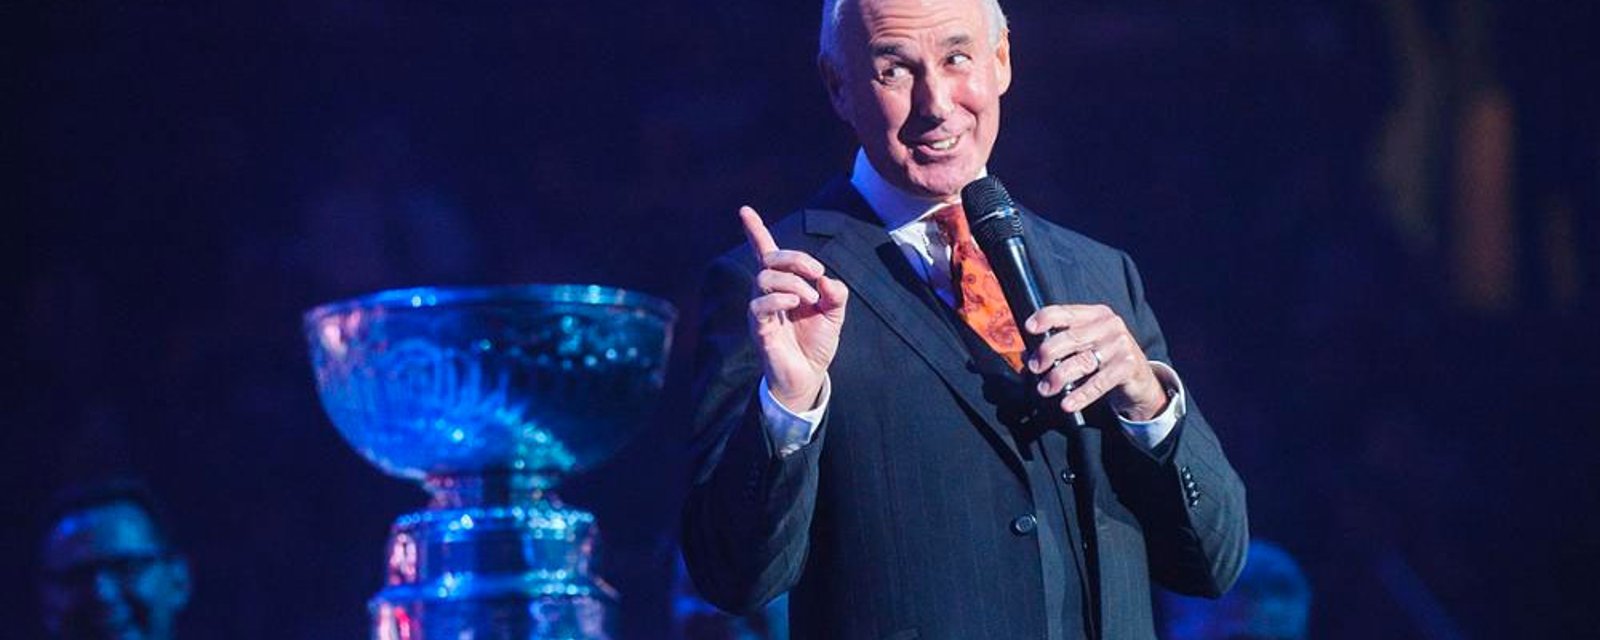 Sportsnet/CBC makes a decision on Ron MacLean's future